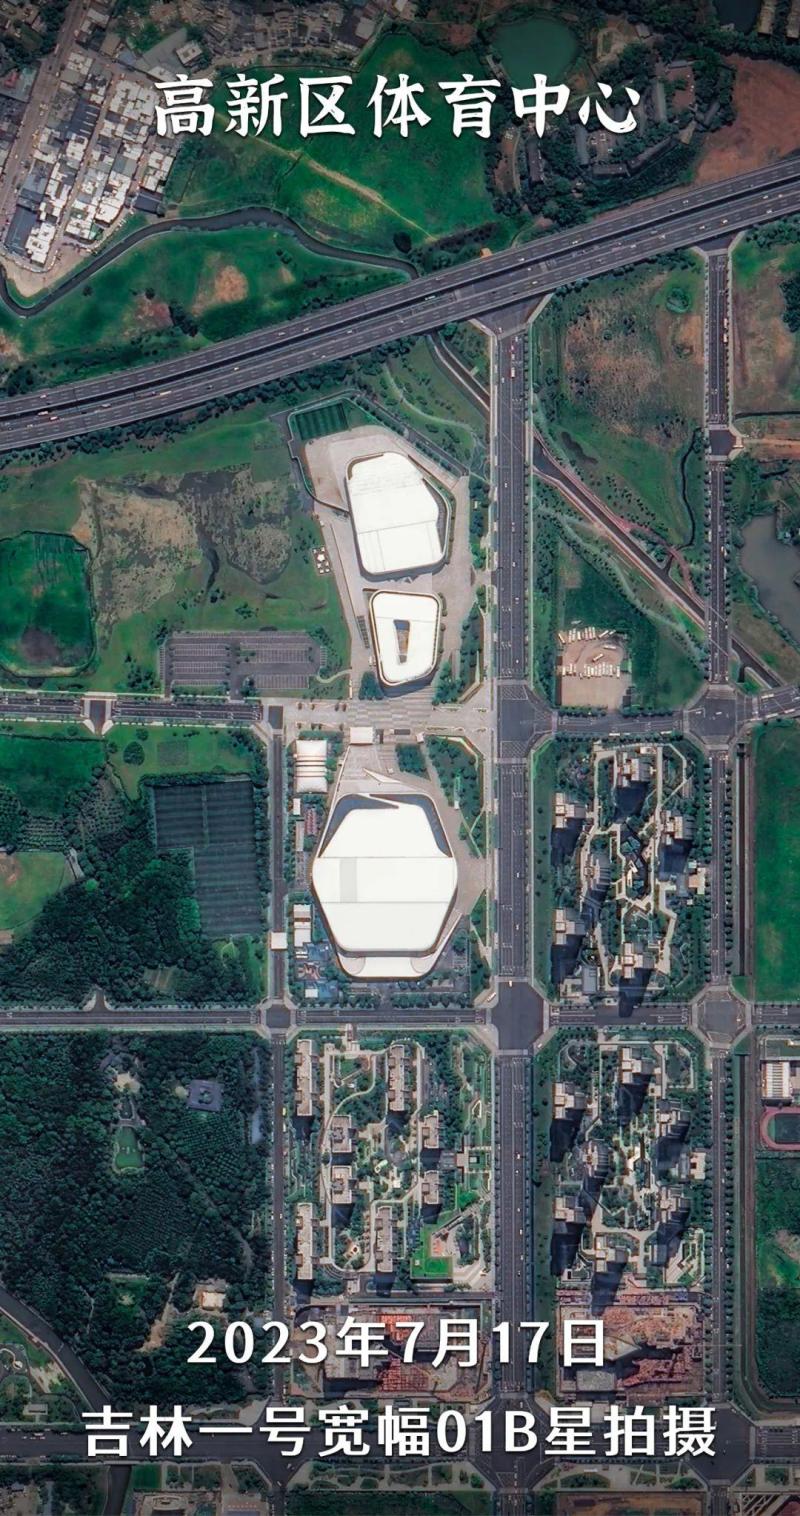 Check in the "Sichuan style" venues of the Chengdu Universiade from a satellite perspective! Venue | Competition | Universiade